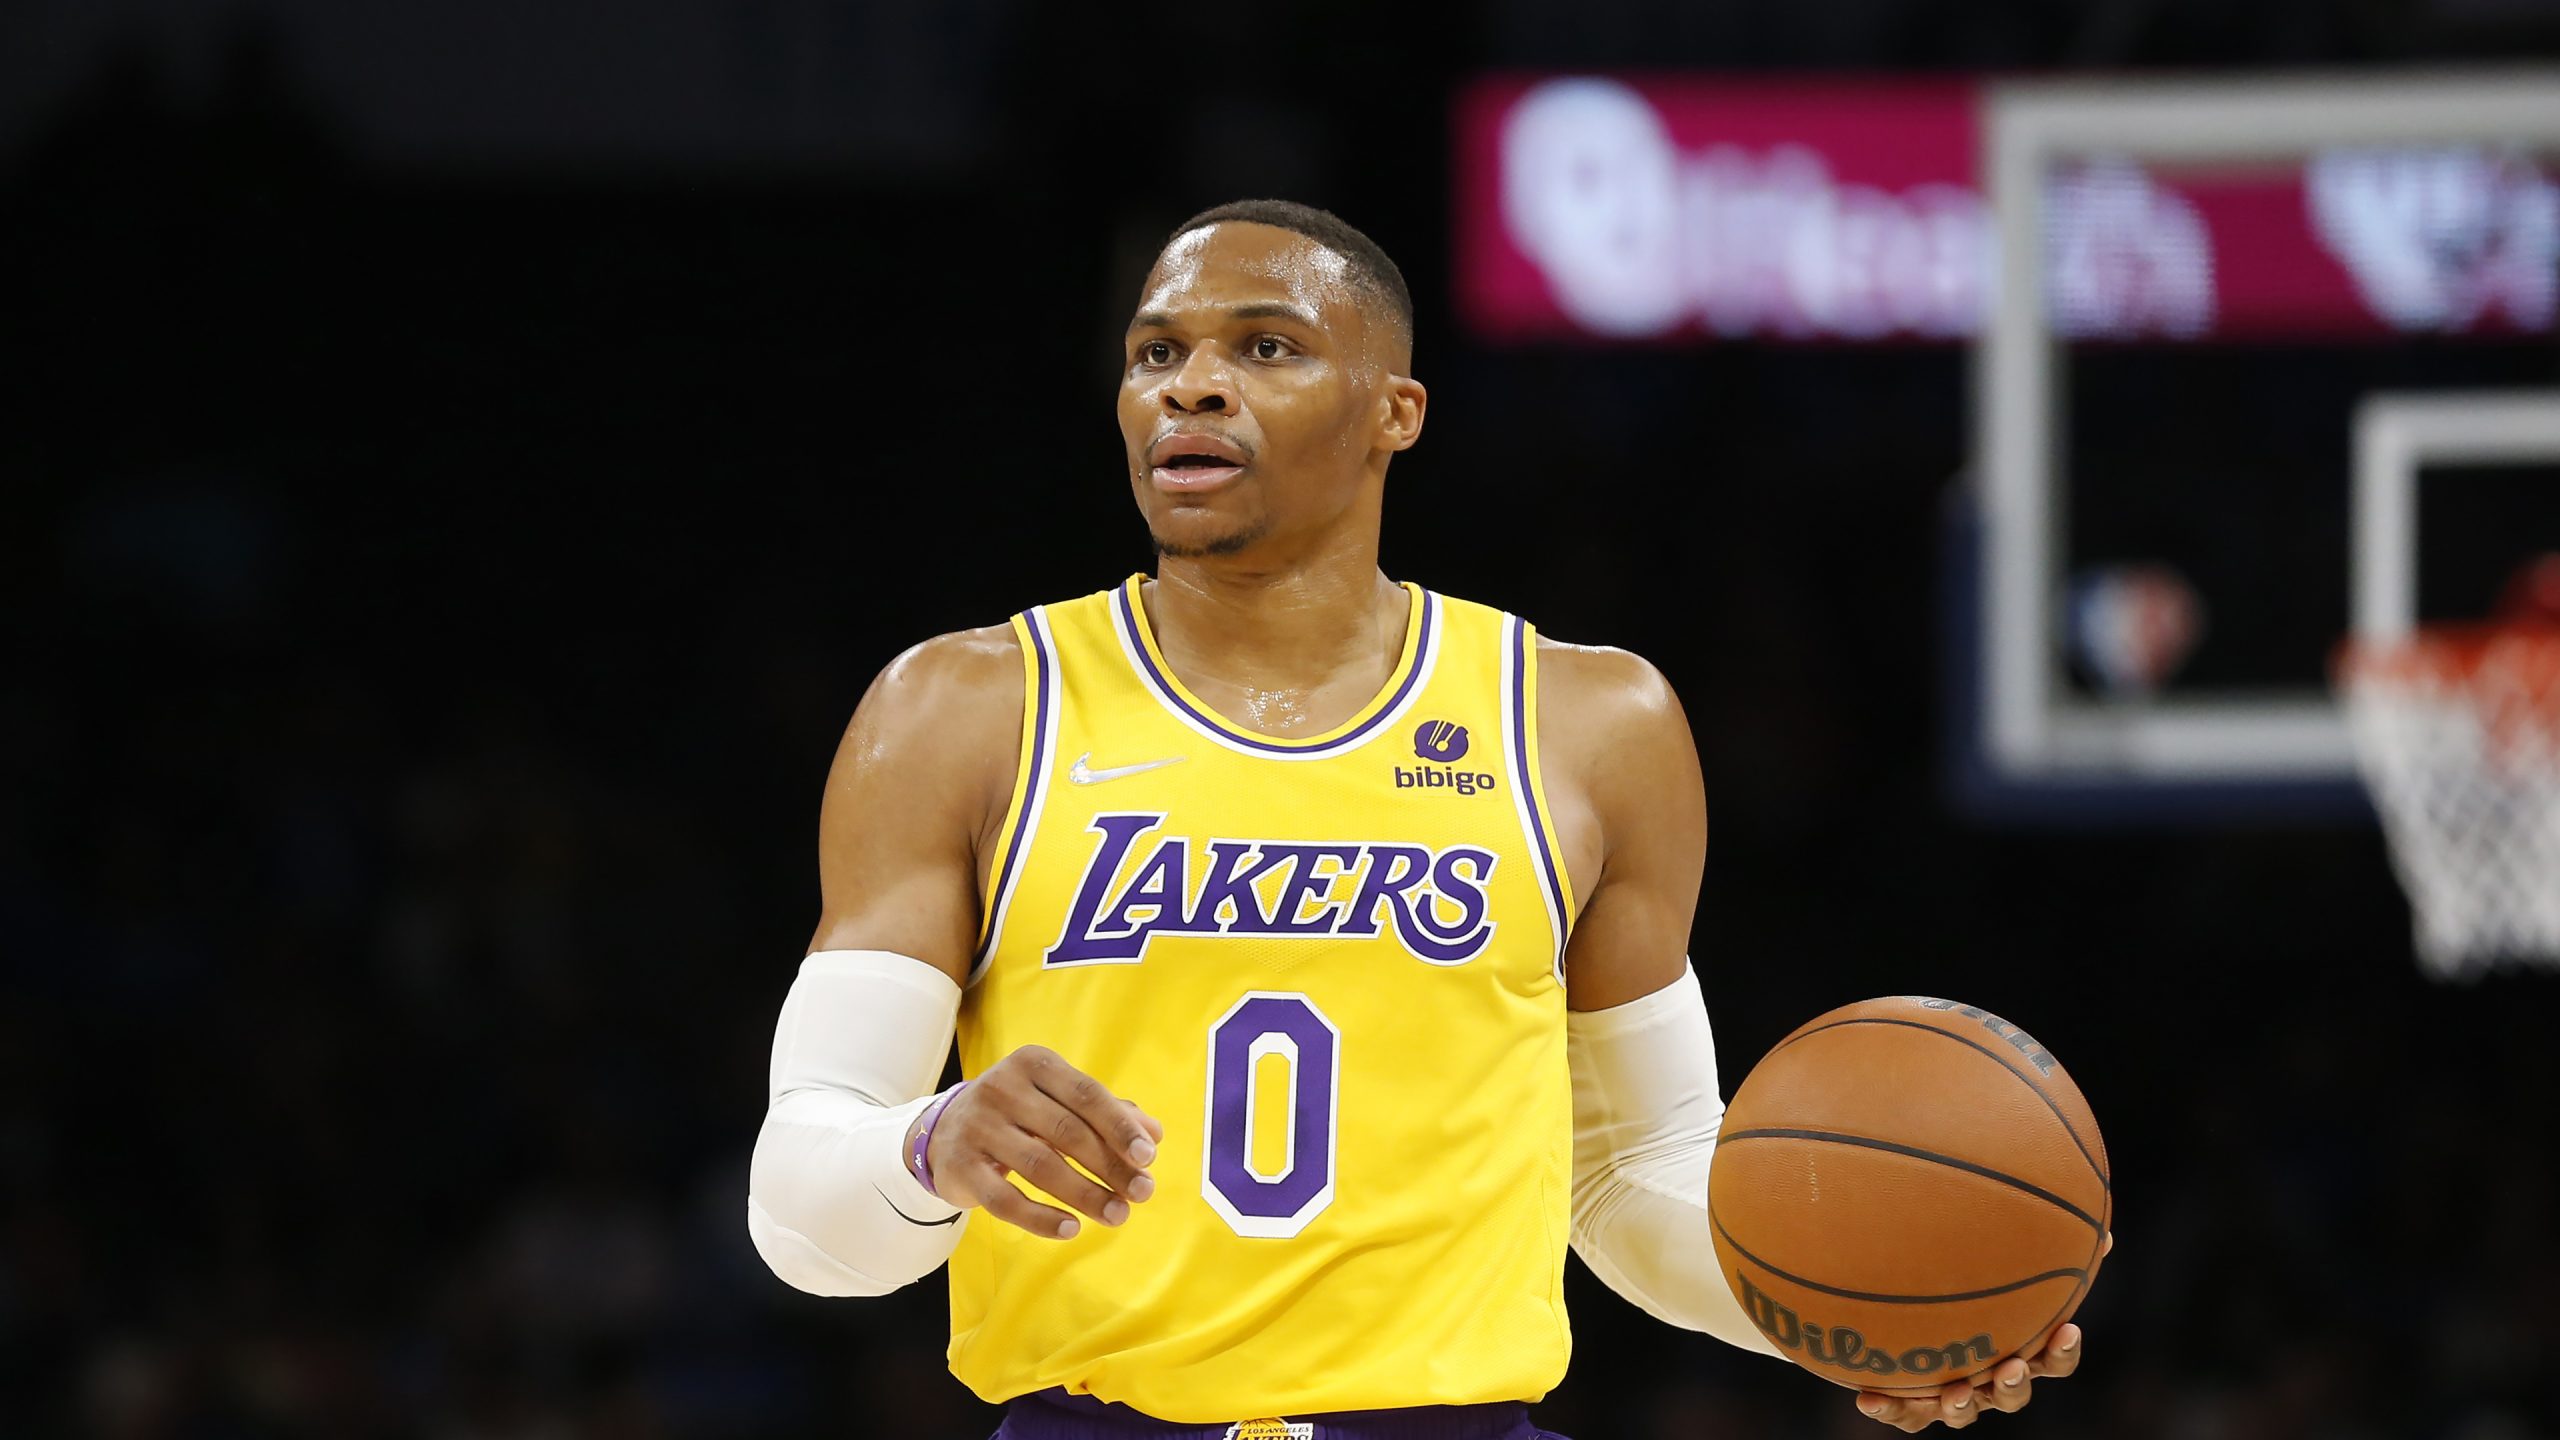 Los Angeles Lakers guard Russell Westbrook (0) during the first half of an NBA basketball game against the Oklahoma City Thunder, Wednesday, Oct. 27, 2021, in Oklahoma City. (AP Photo/Garett Fisbeck)